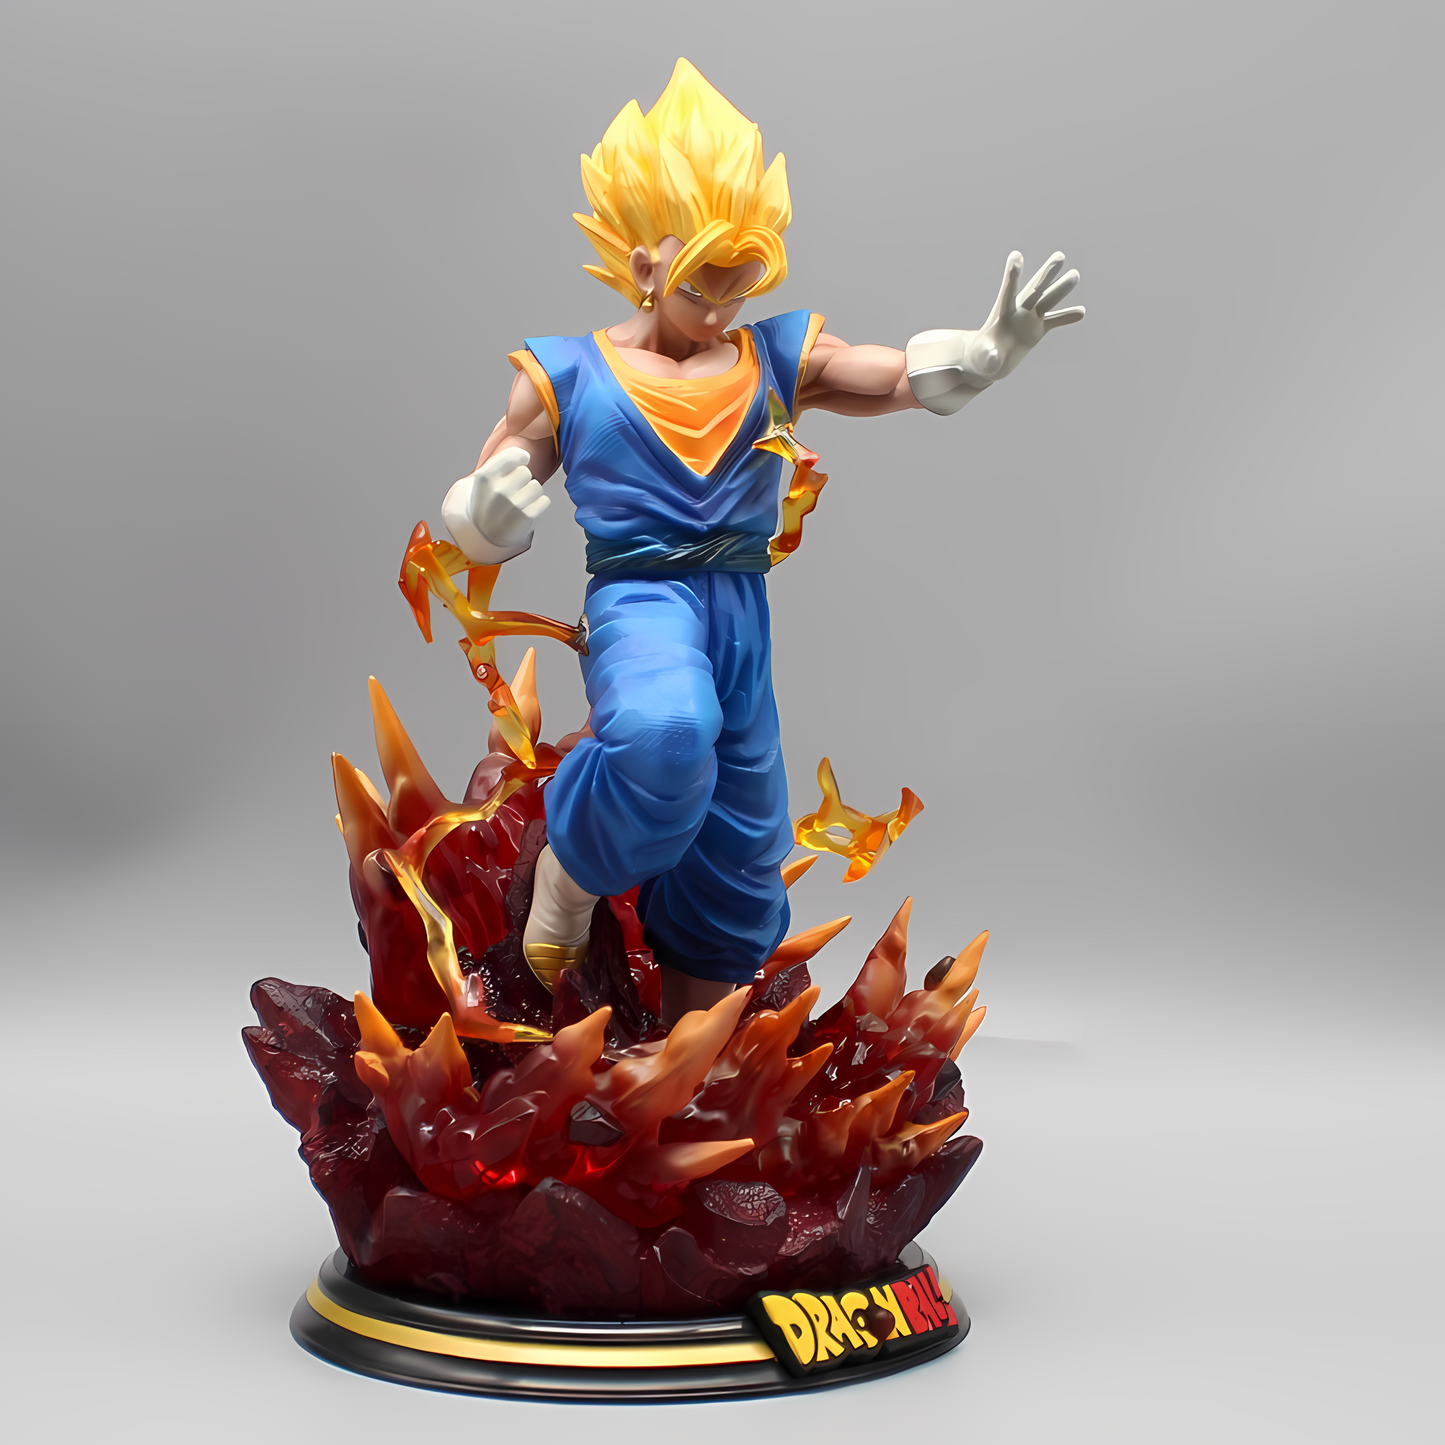 A full-frontal view of the Dragon Ball Vegetto figure, poised with a raised hand, showcasing his vibrant blue costume and electrifying aura on a fiery base.